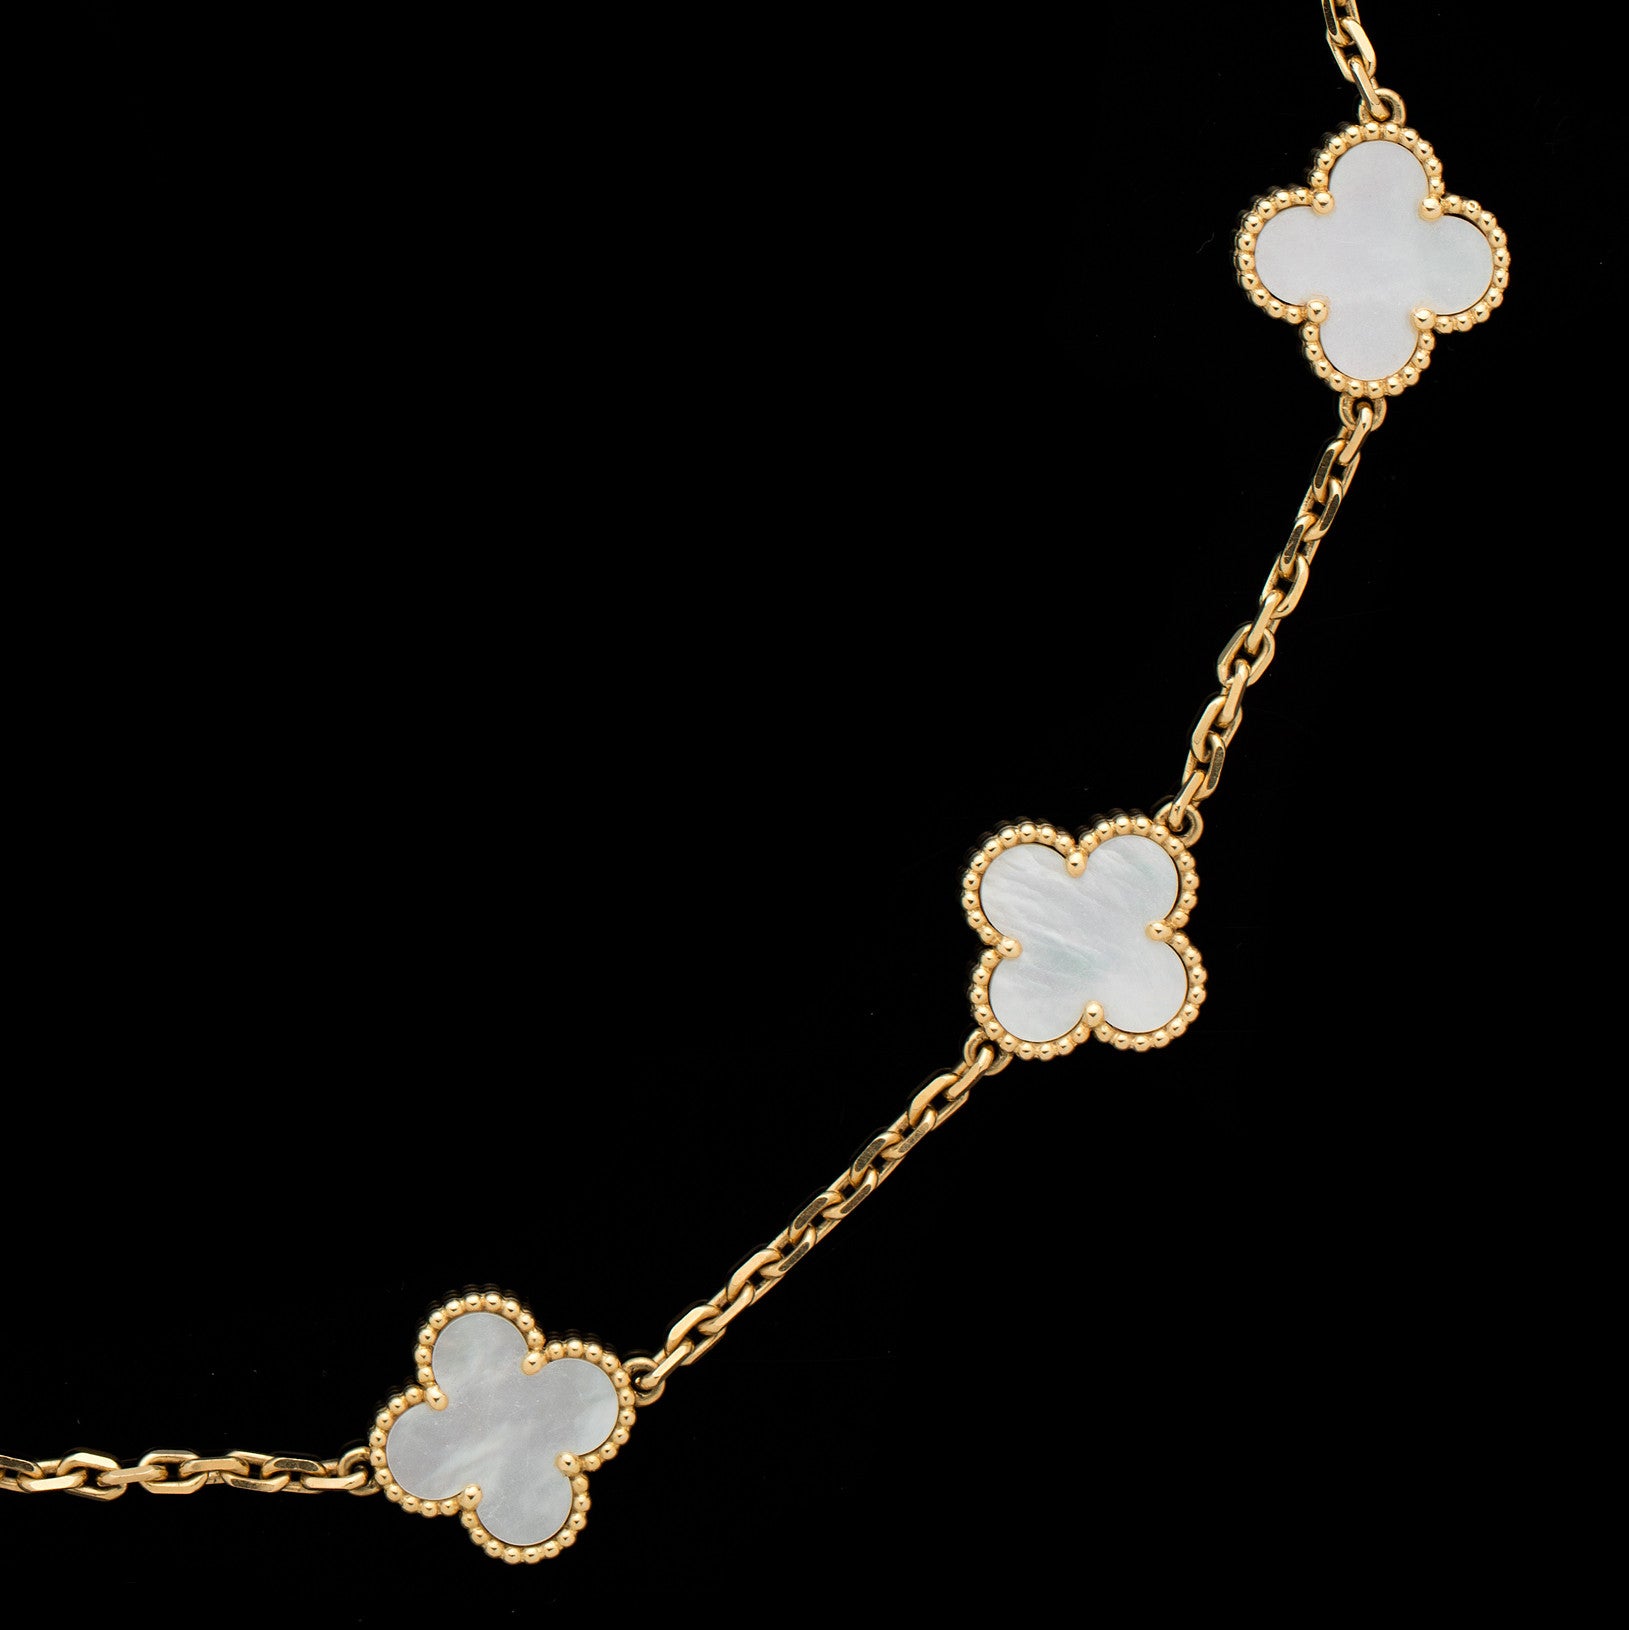 such an iconic must have piece: Van Cleef & Arpels Vintage